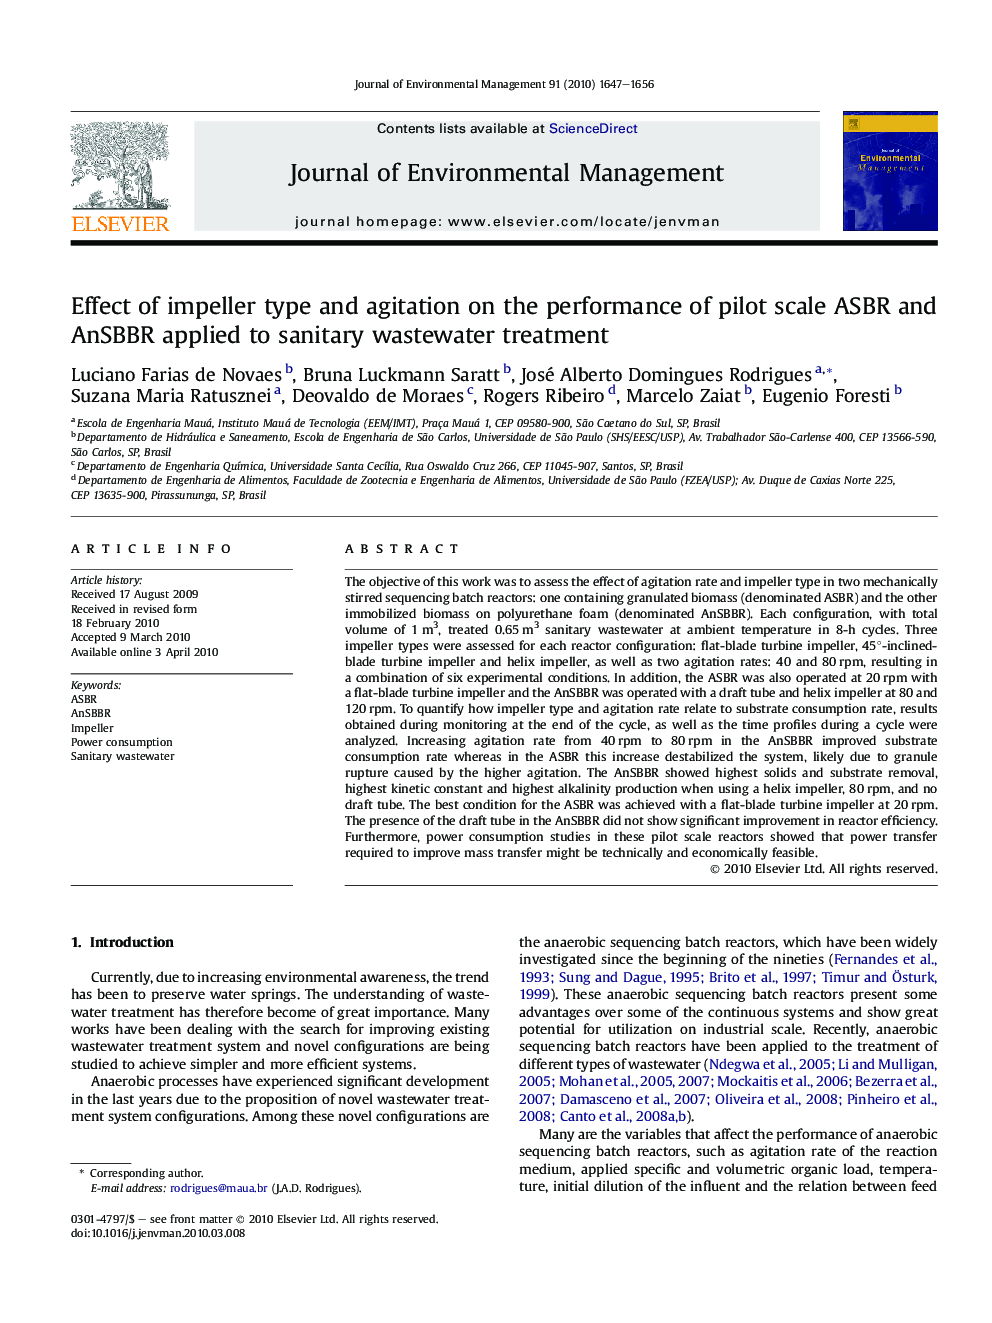 Effect of impeller type and agitation on the performance of pilot scale ASBR and AnSBBR applied to sanitary wastewater treatment